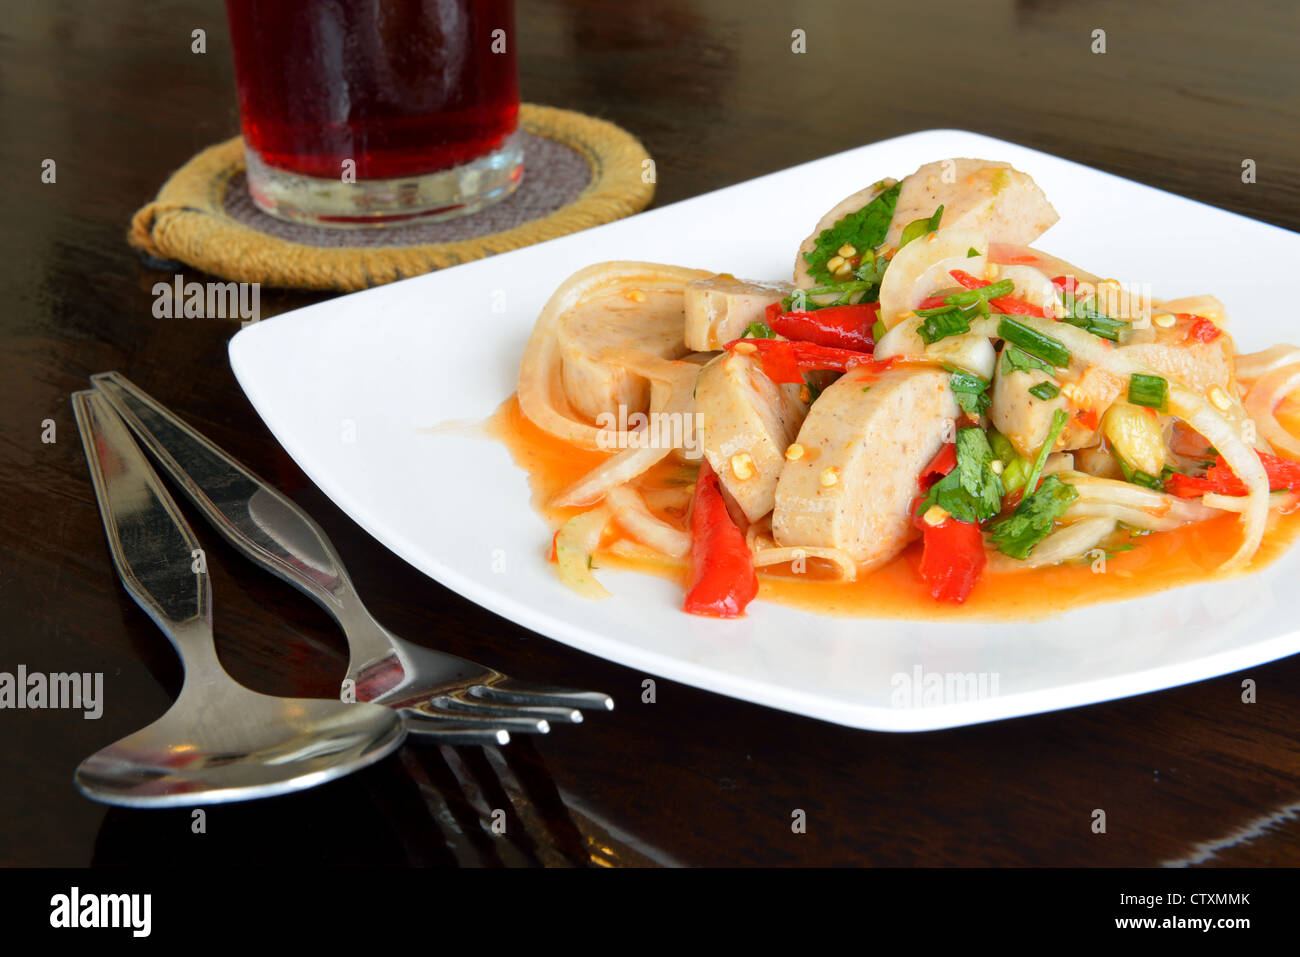 Thai food call 'Mince pork spicy salad' is served on the wooden black table. Stock Photo